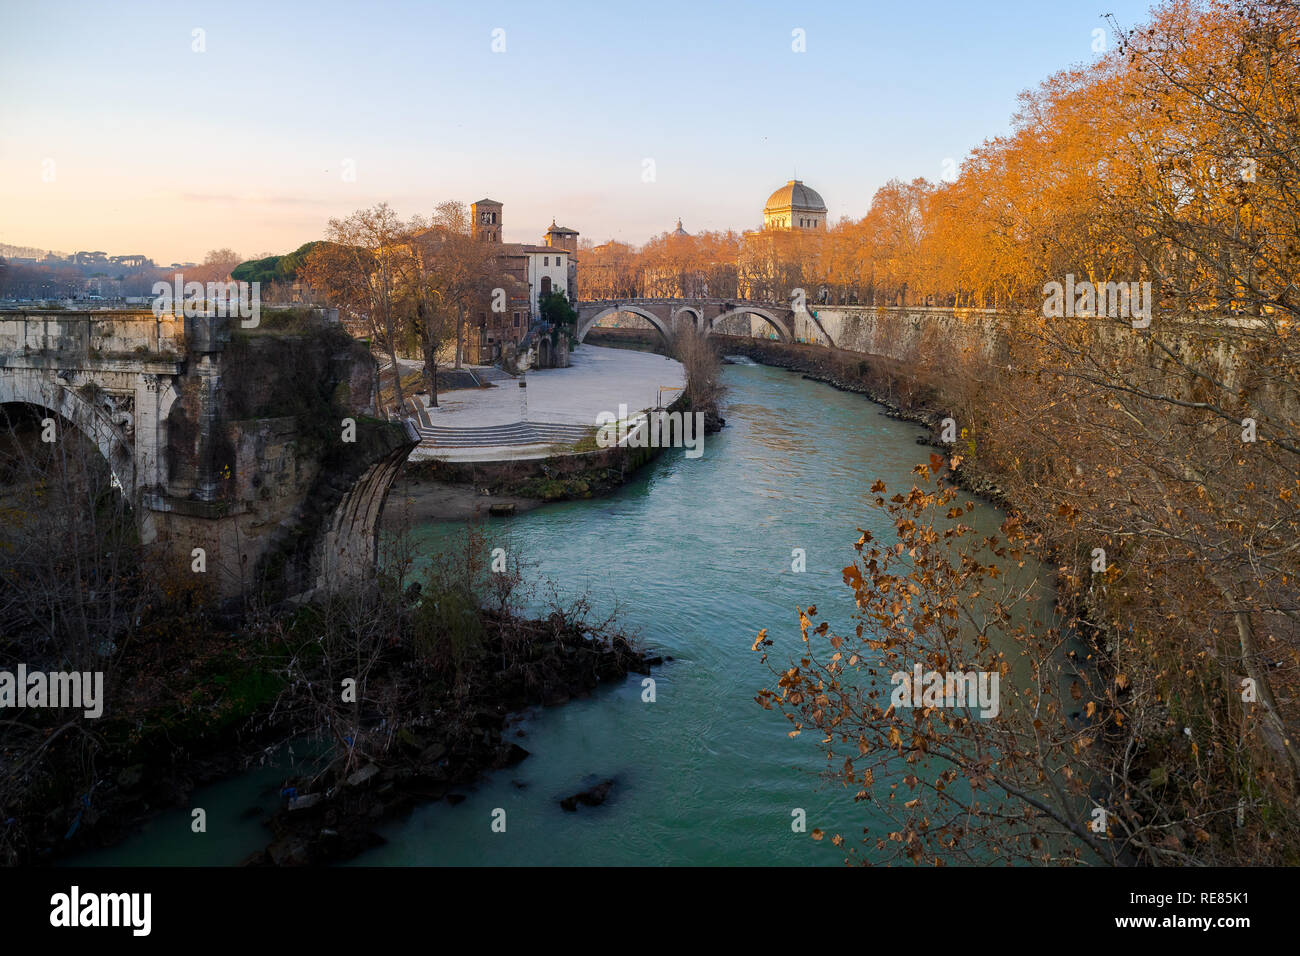 Rome, Italy, 12/29/2008: Rome's Tiberina island, Tiber river, river quay with yellow-leaved trees, in the background the dome of the synagogue Stock Photo